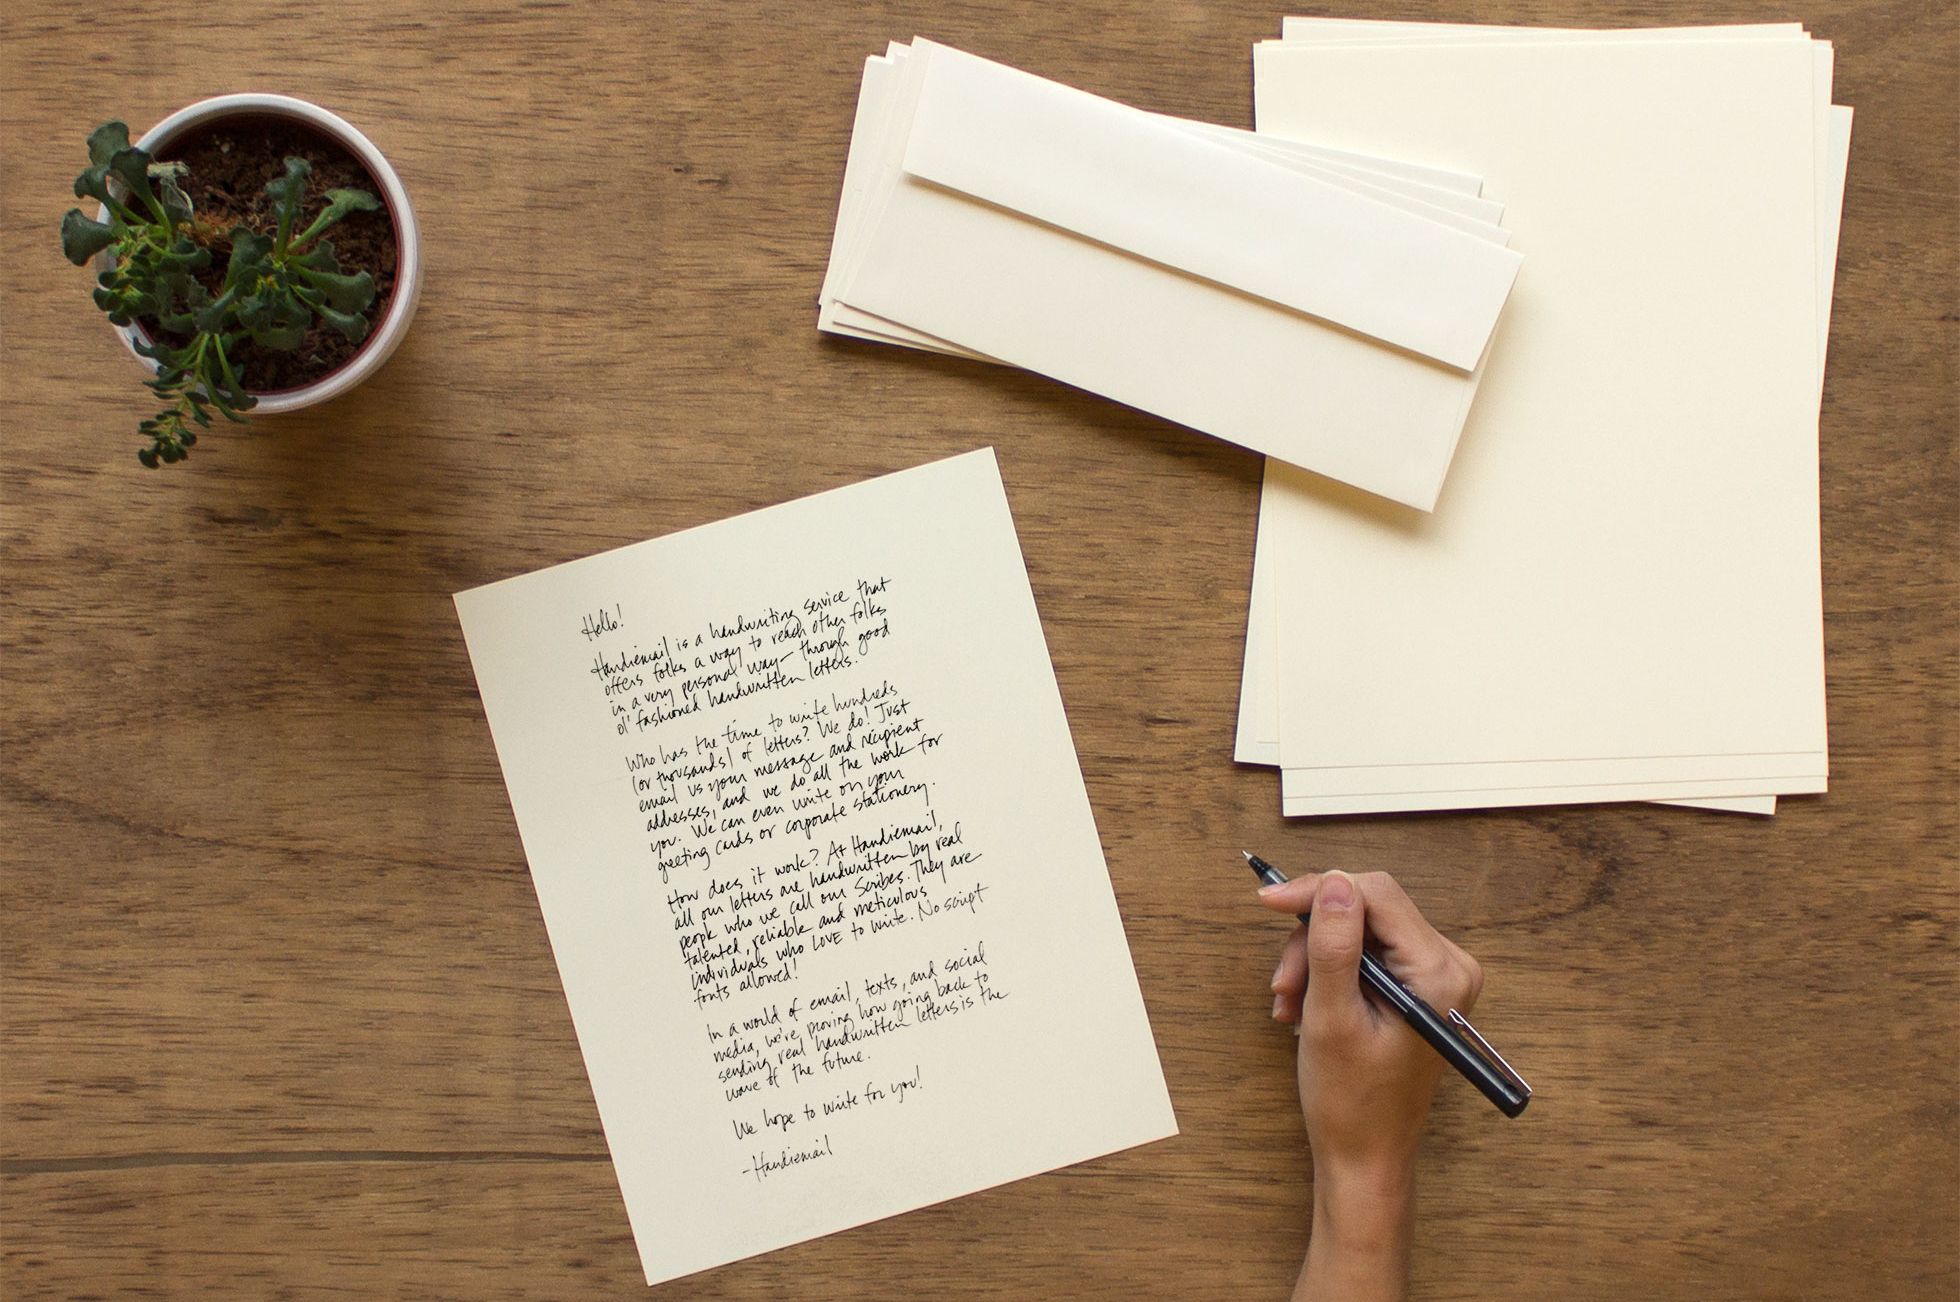 How To Write a Direct Mail Letter.